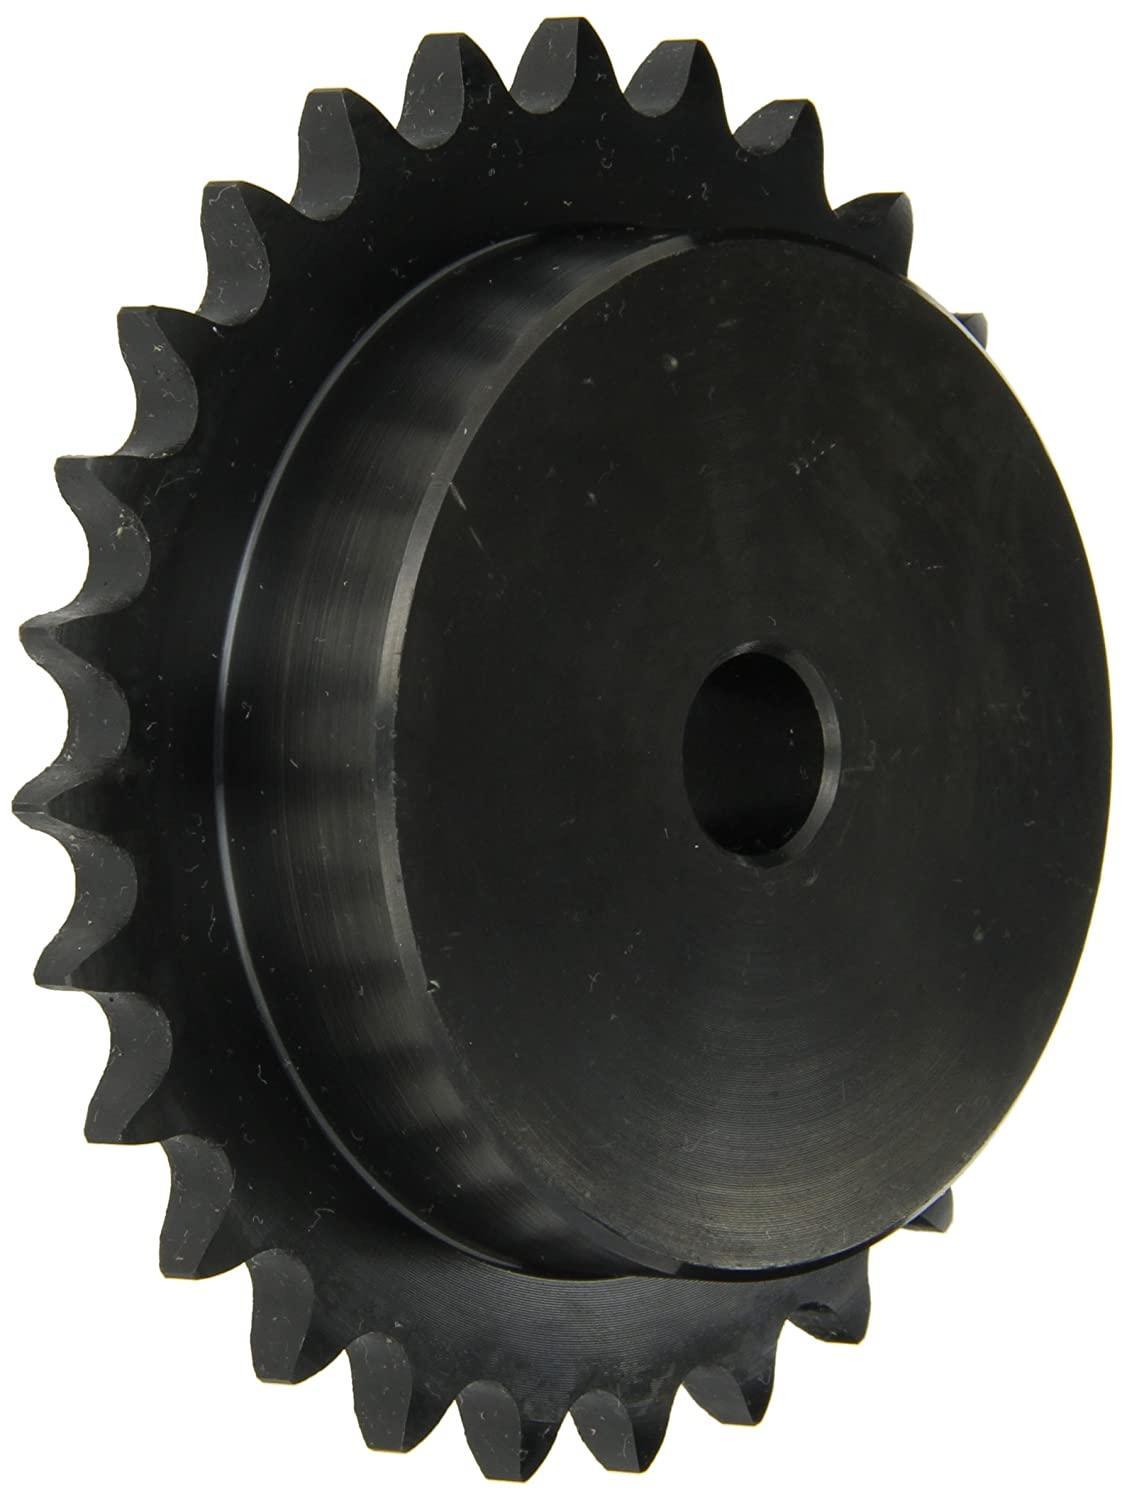 100B25 Roller Chain Sprocket With Stock Bore - Forces Inc